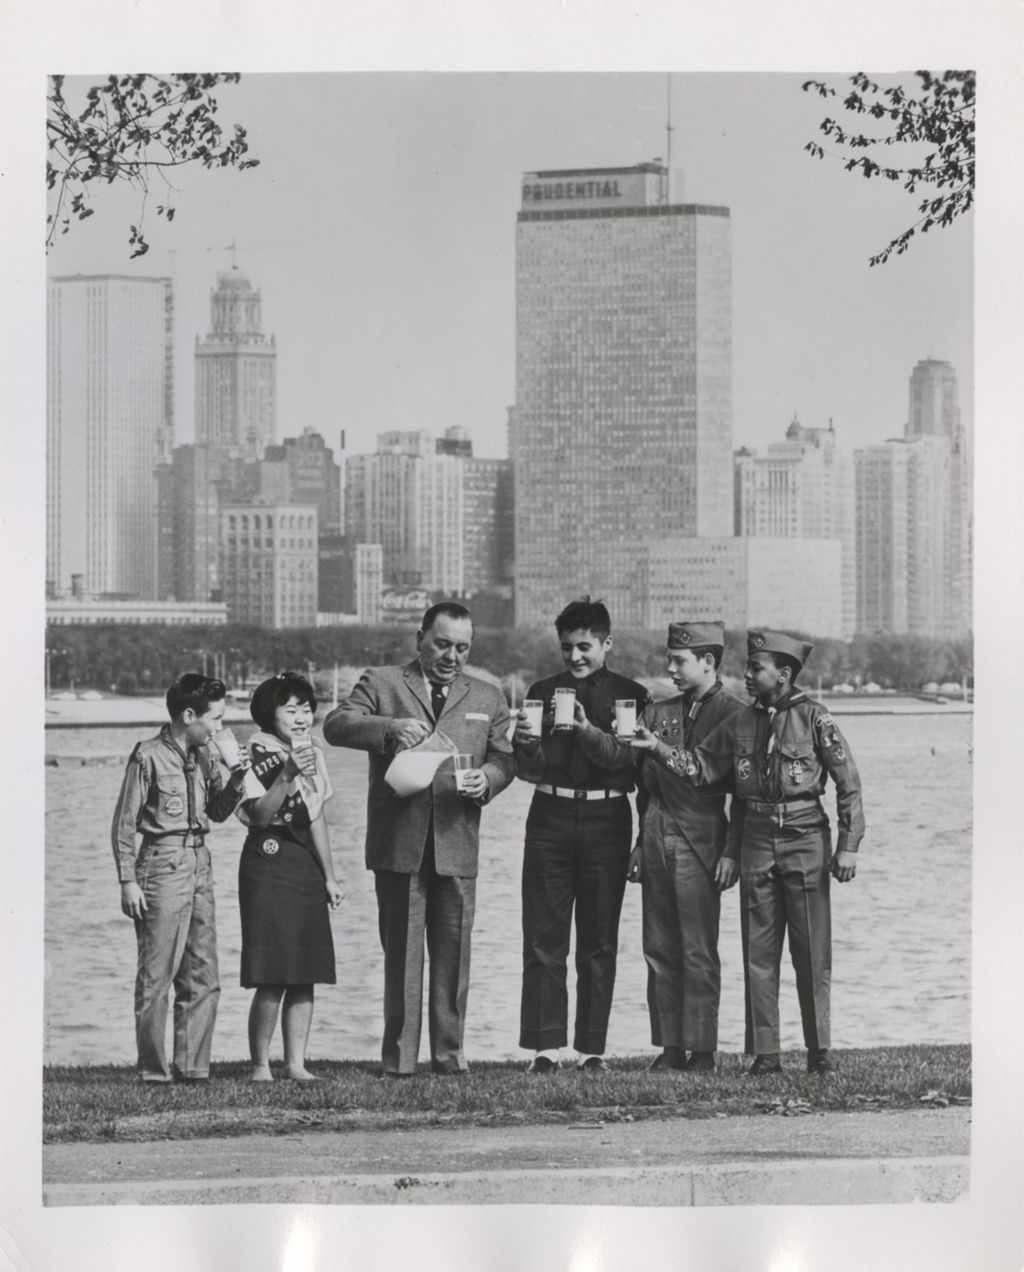 Richard J. Daley pouring milk with Scouts on lakefront